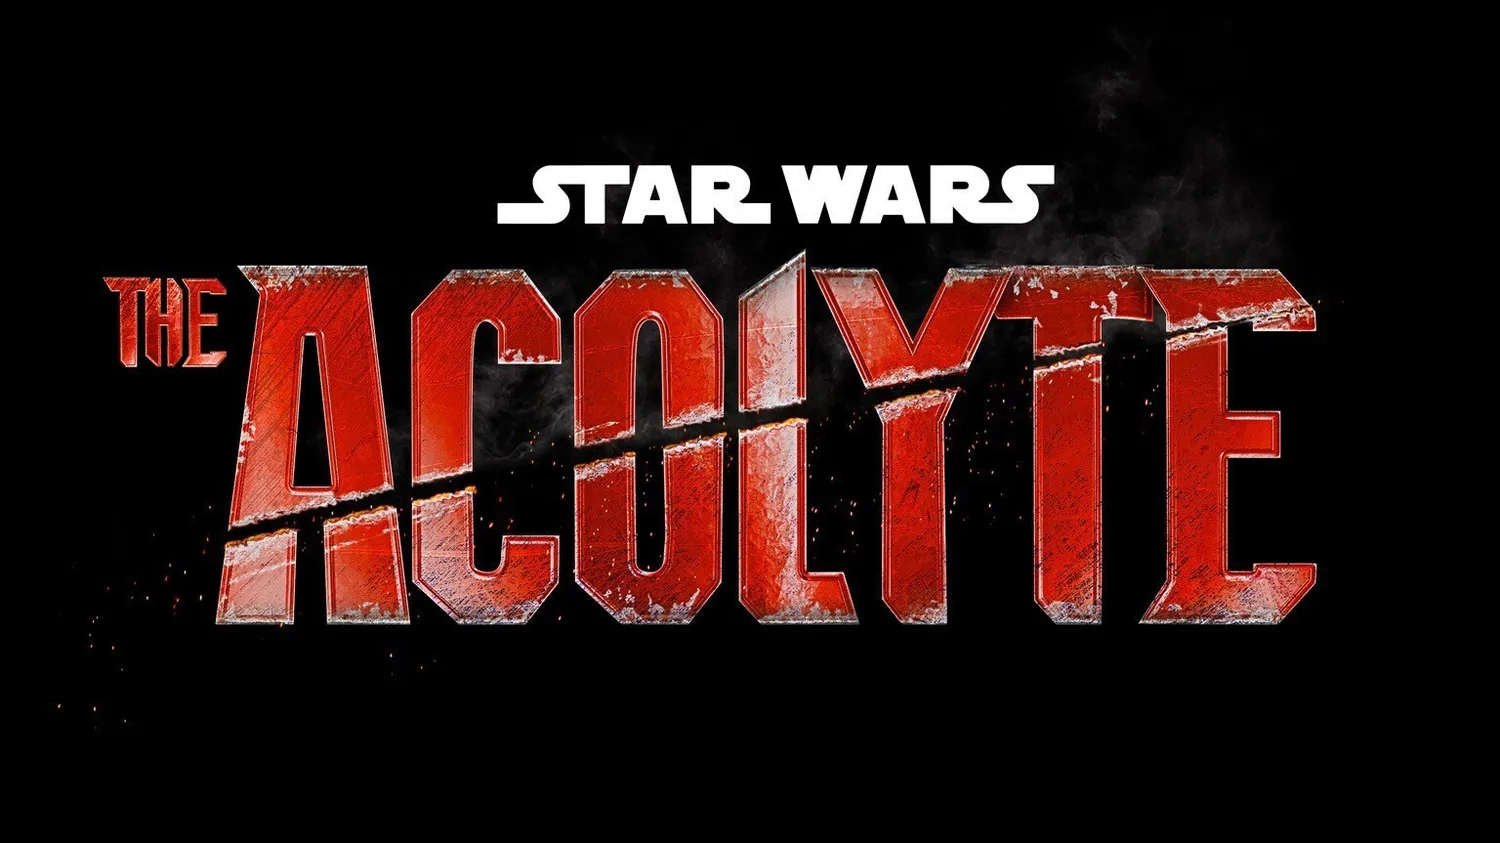 Star Wars "The Acolyte"